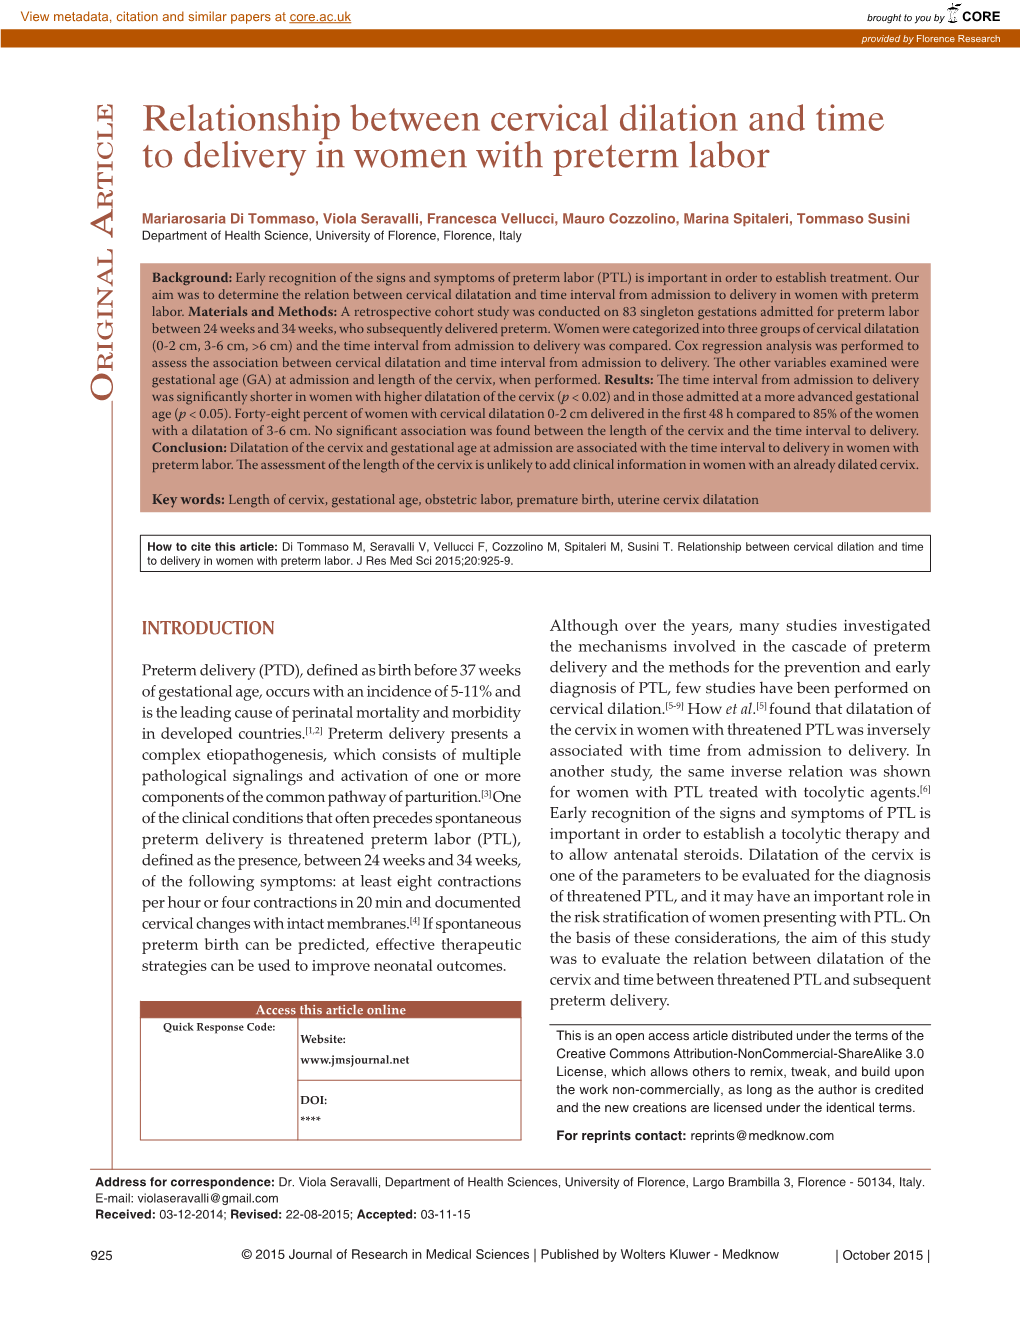 Relationship Between Cervical Dilation and Time to Delivery in Women with Preterm Labor